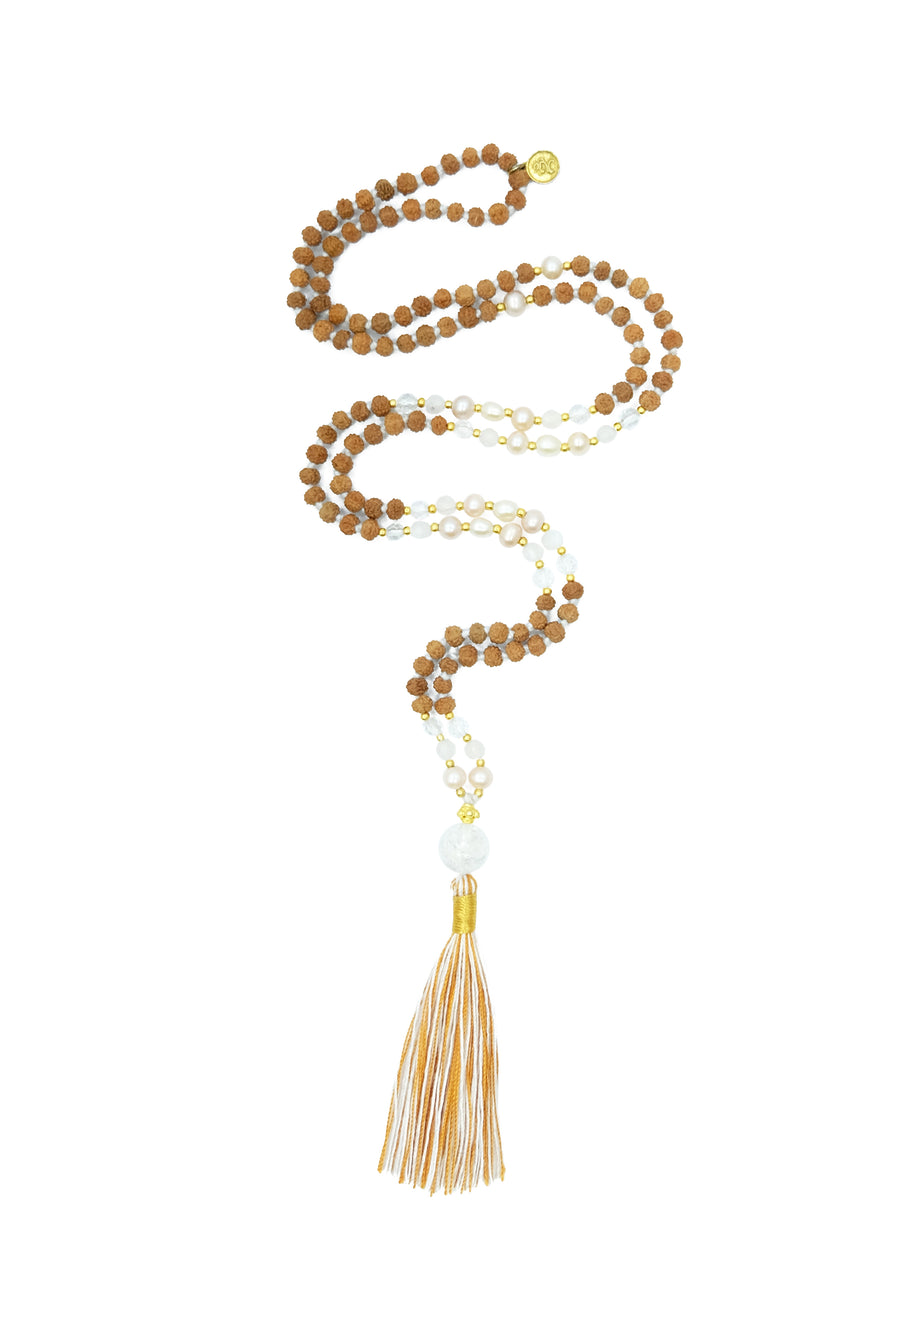 The Crystal Clarity mala features a divine trio of quartz, pearls, and rudraksha, can heighten insights of intuition and open a clear channel with your higher-self.